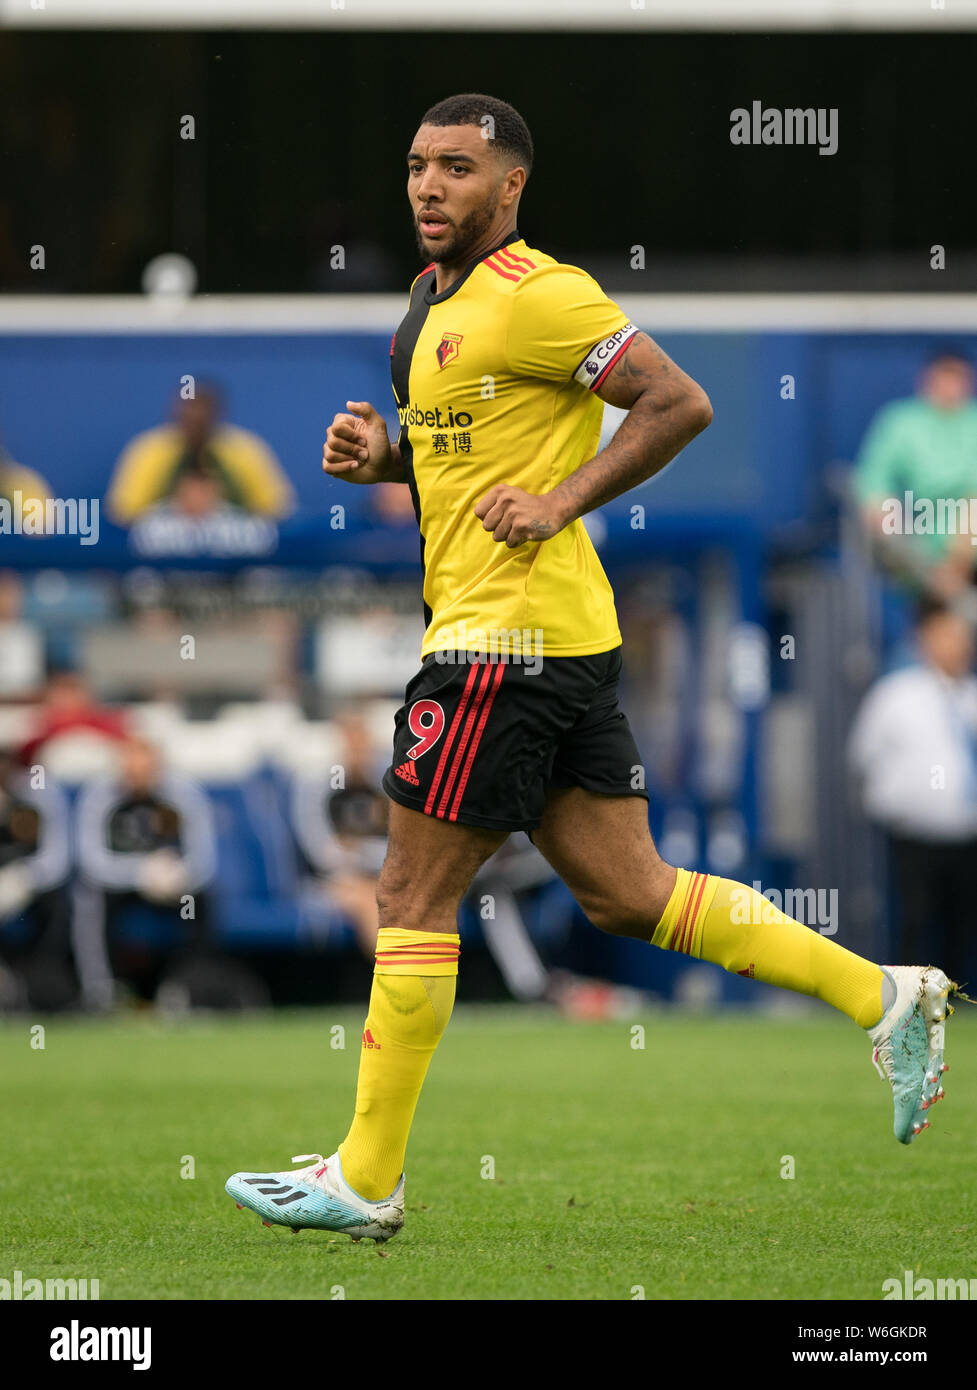 Troy Deeney of Watford during the pre season friendly match between QPR & Watford at Loftus Road Stadium, London, England on 27 July 2019. Photo by An Stock Photo